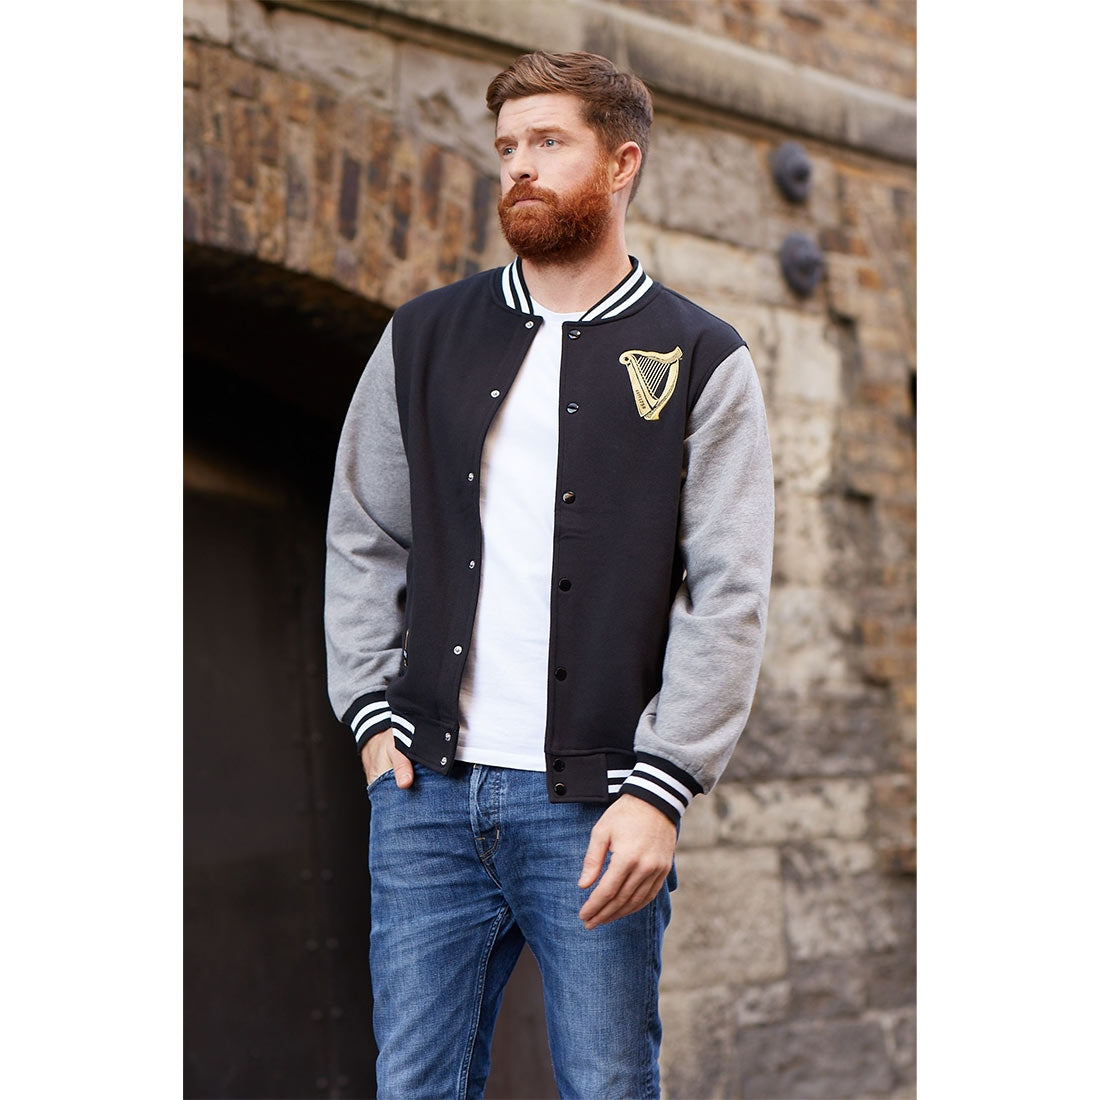 A man with a beard and jeans wearing a Guinness Letterman Jacket, proudly displaying Guinness merchandise.